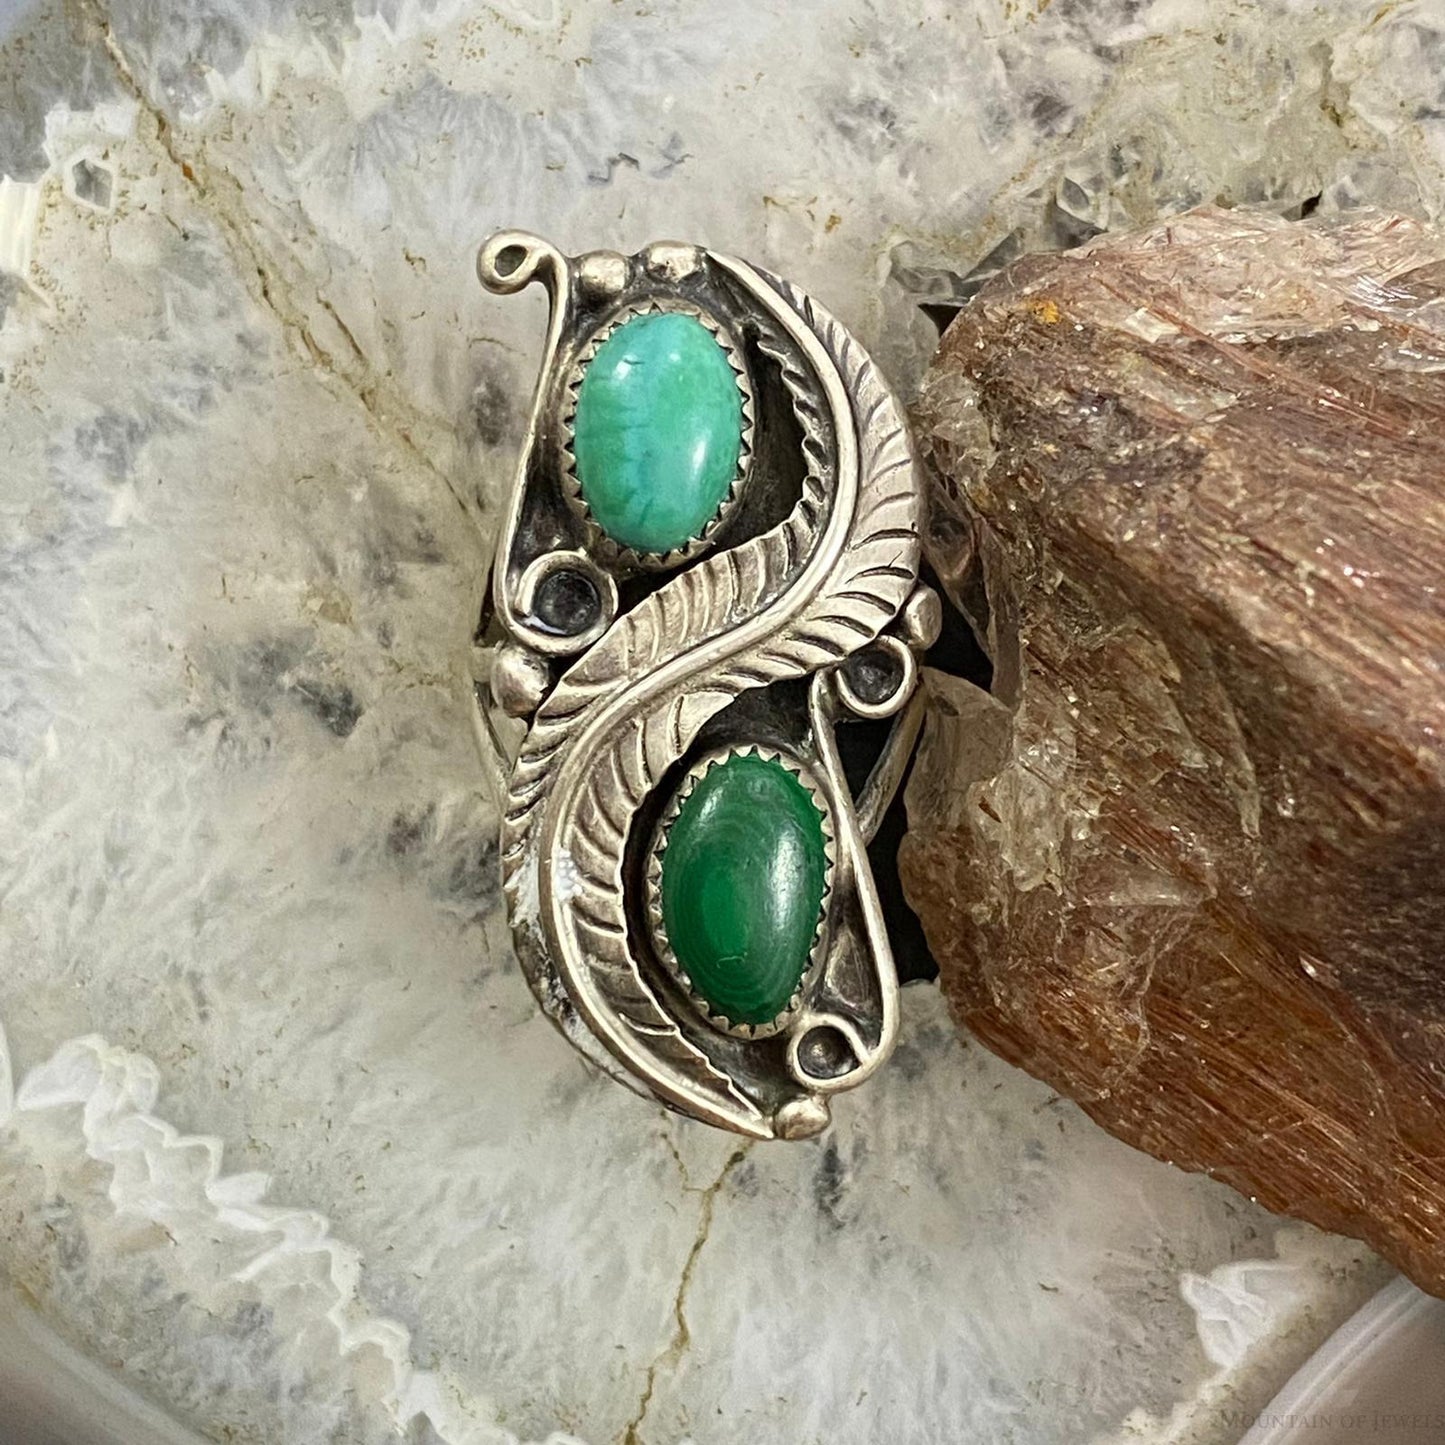 Vintage Native American Silver Turquoise & Malachite Decorated Ring Size 7.75 For Women